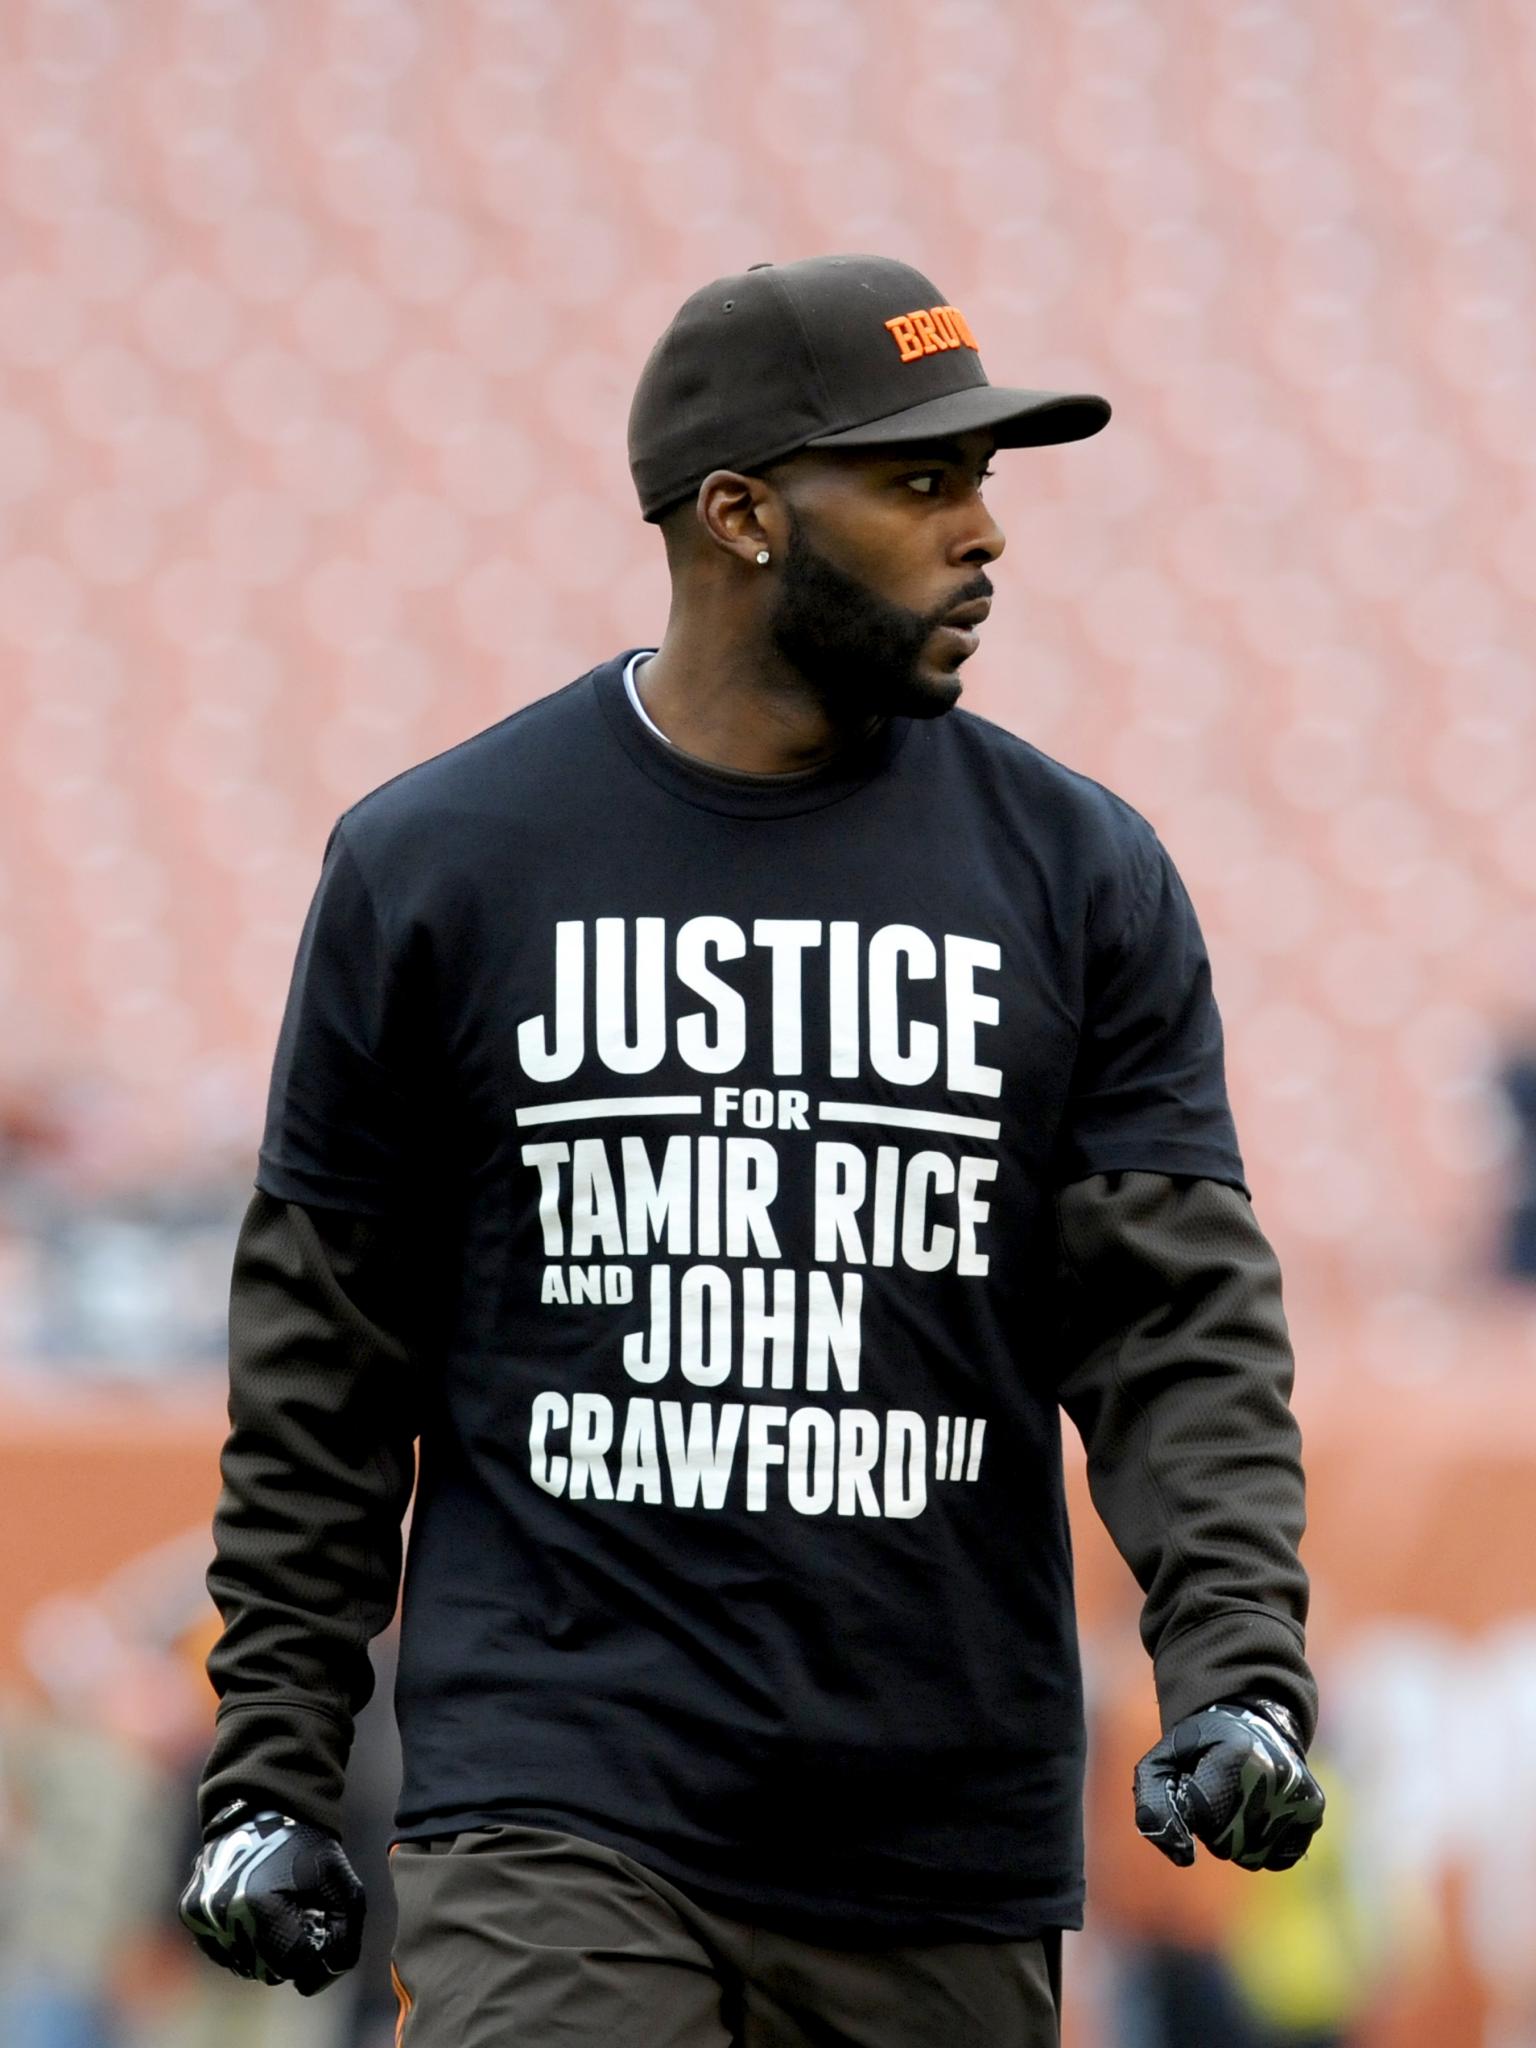 Watch Cleveland Browns' Andrew Hawkins' Perfect Response to Being Criticized for Wearing Tamir Rice Shirt